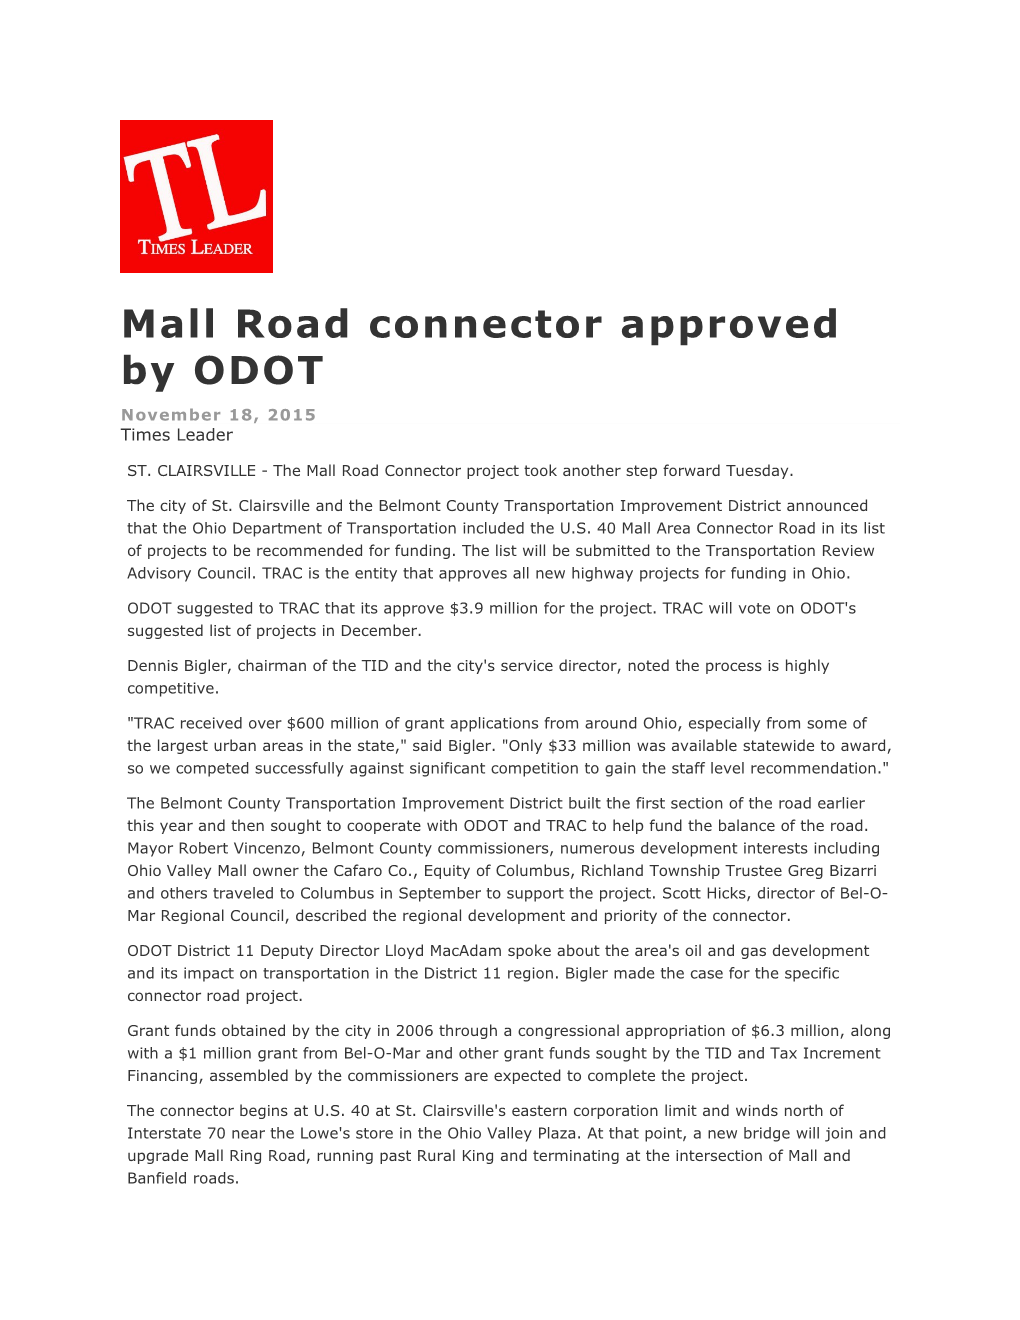 Mall Road Connector Approved by ODOT